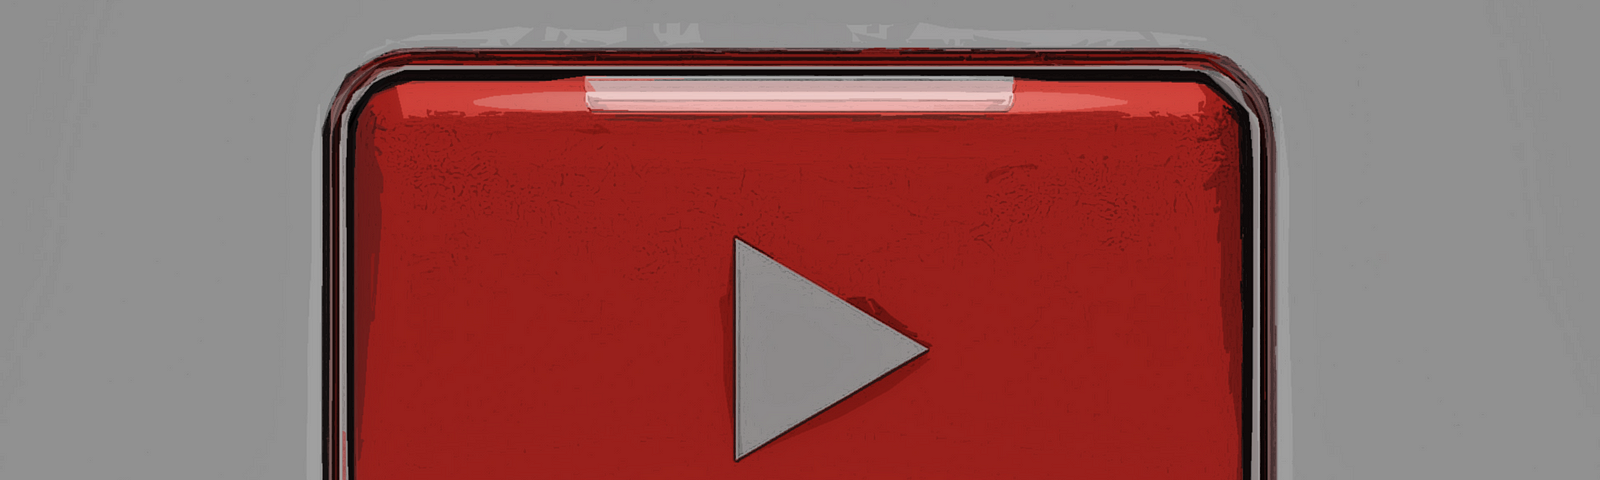 The YouTube play button